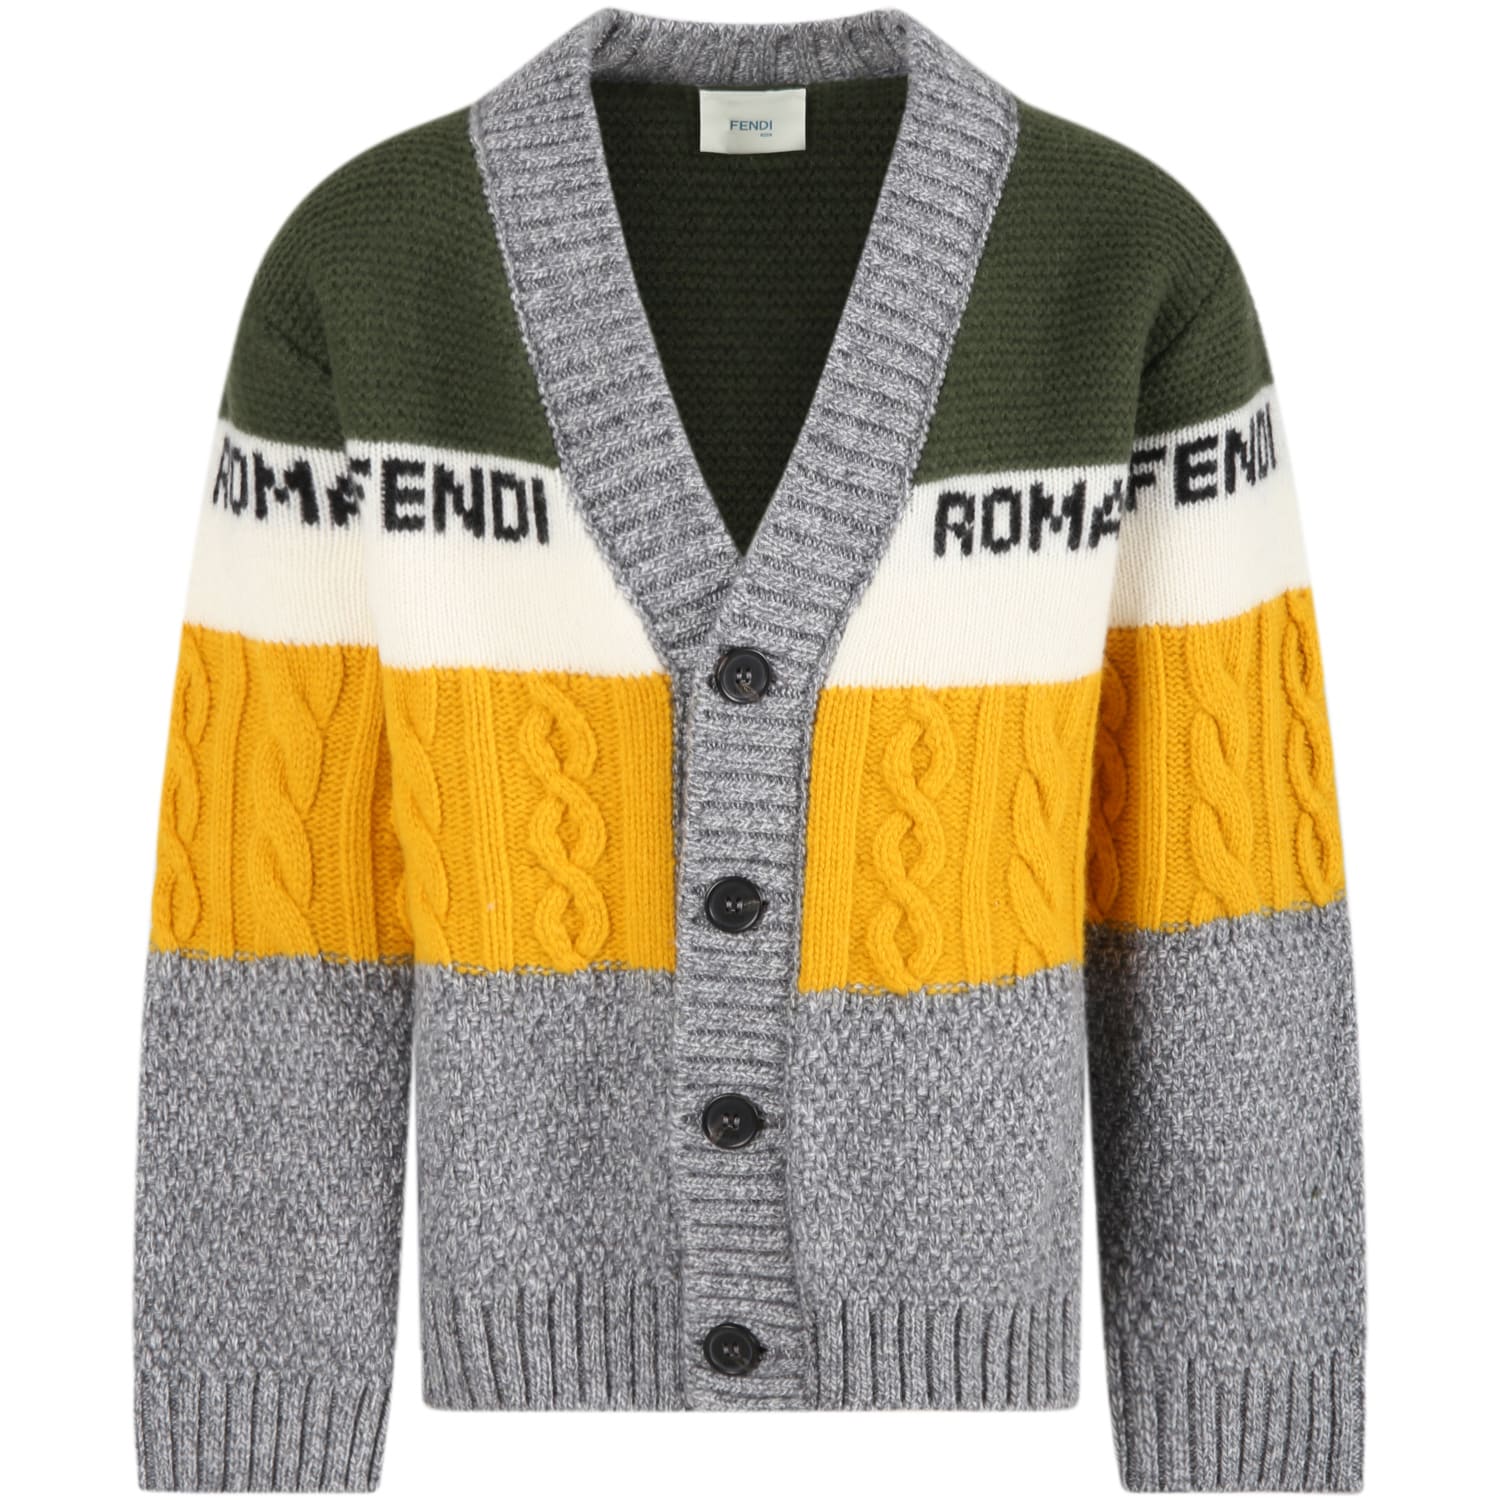 Fendi Multicolor Cardigan For Kids With Logos